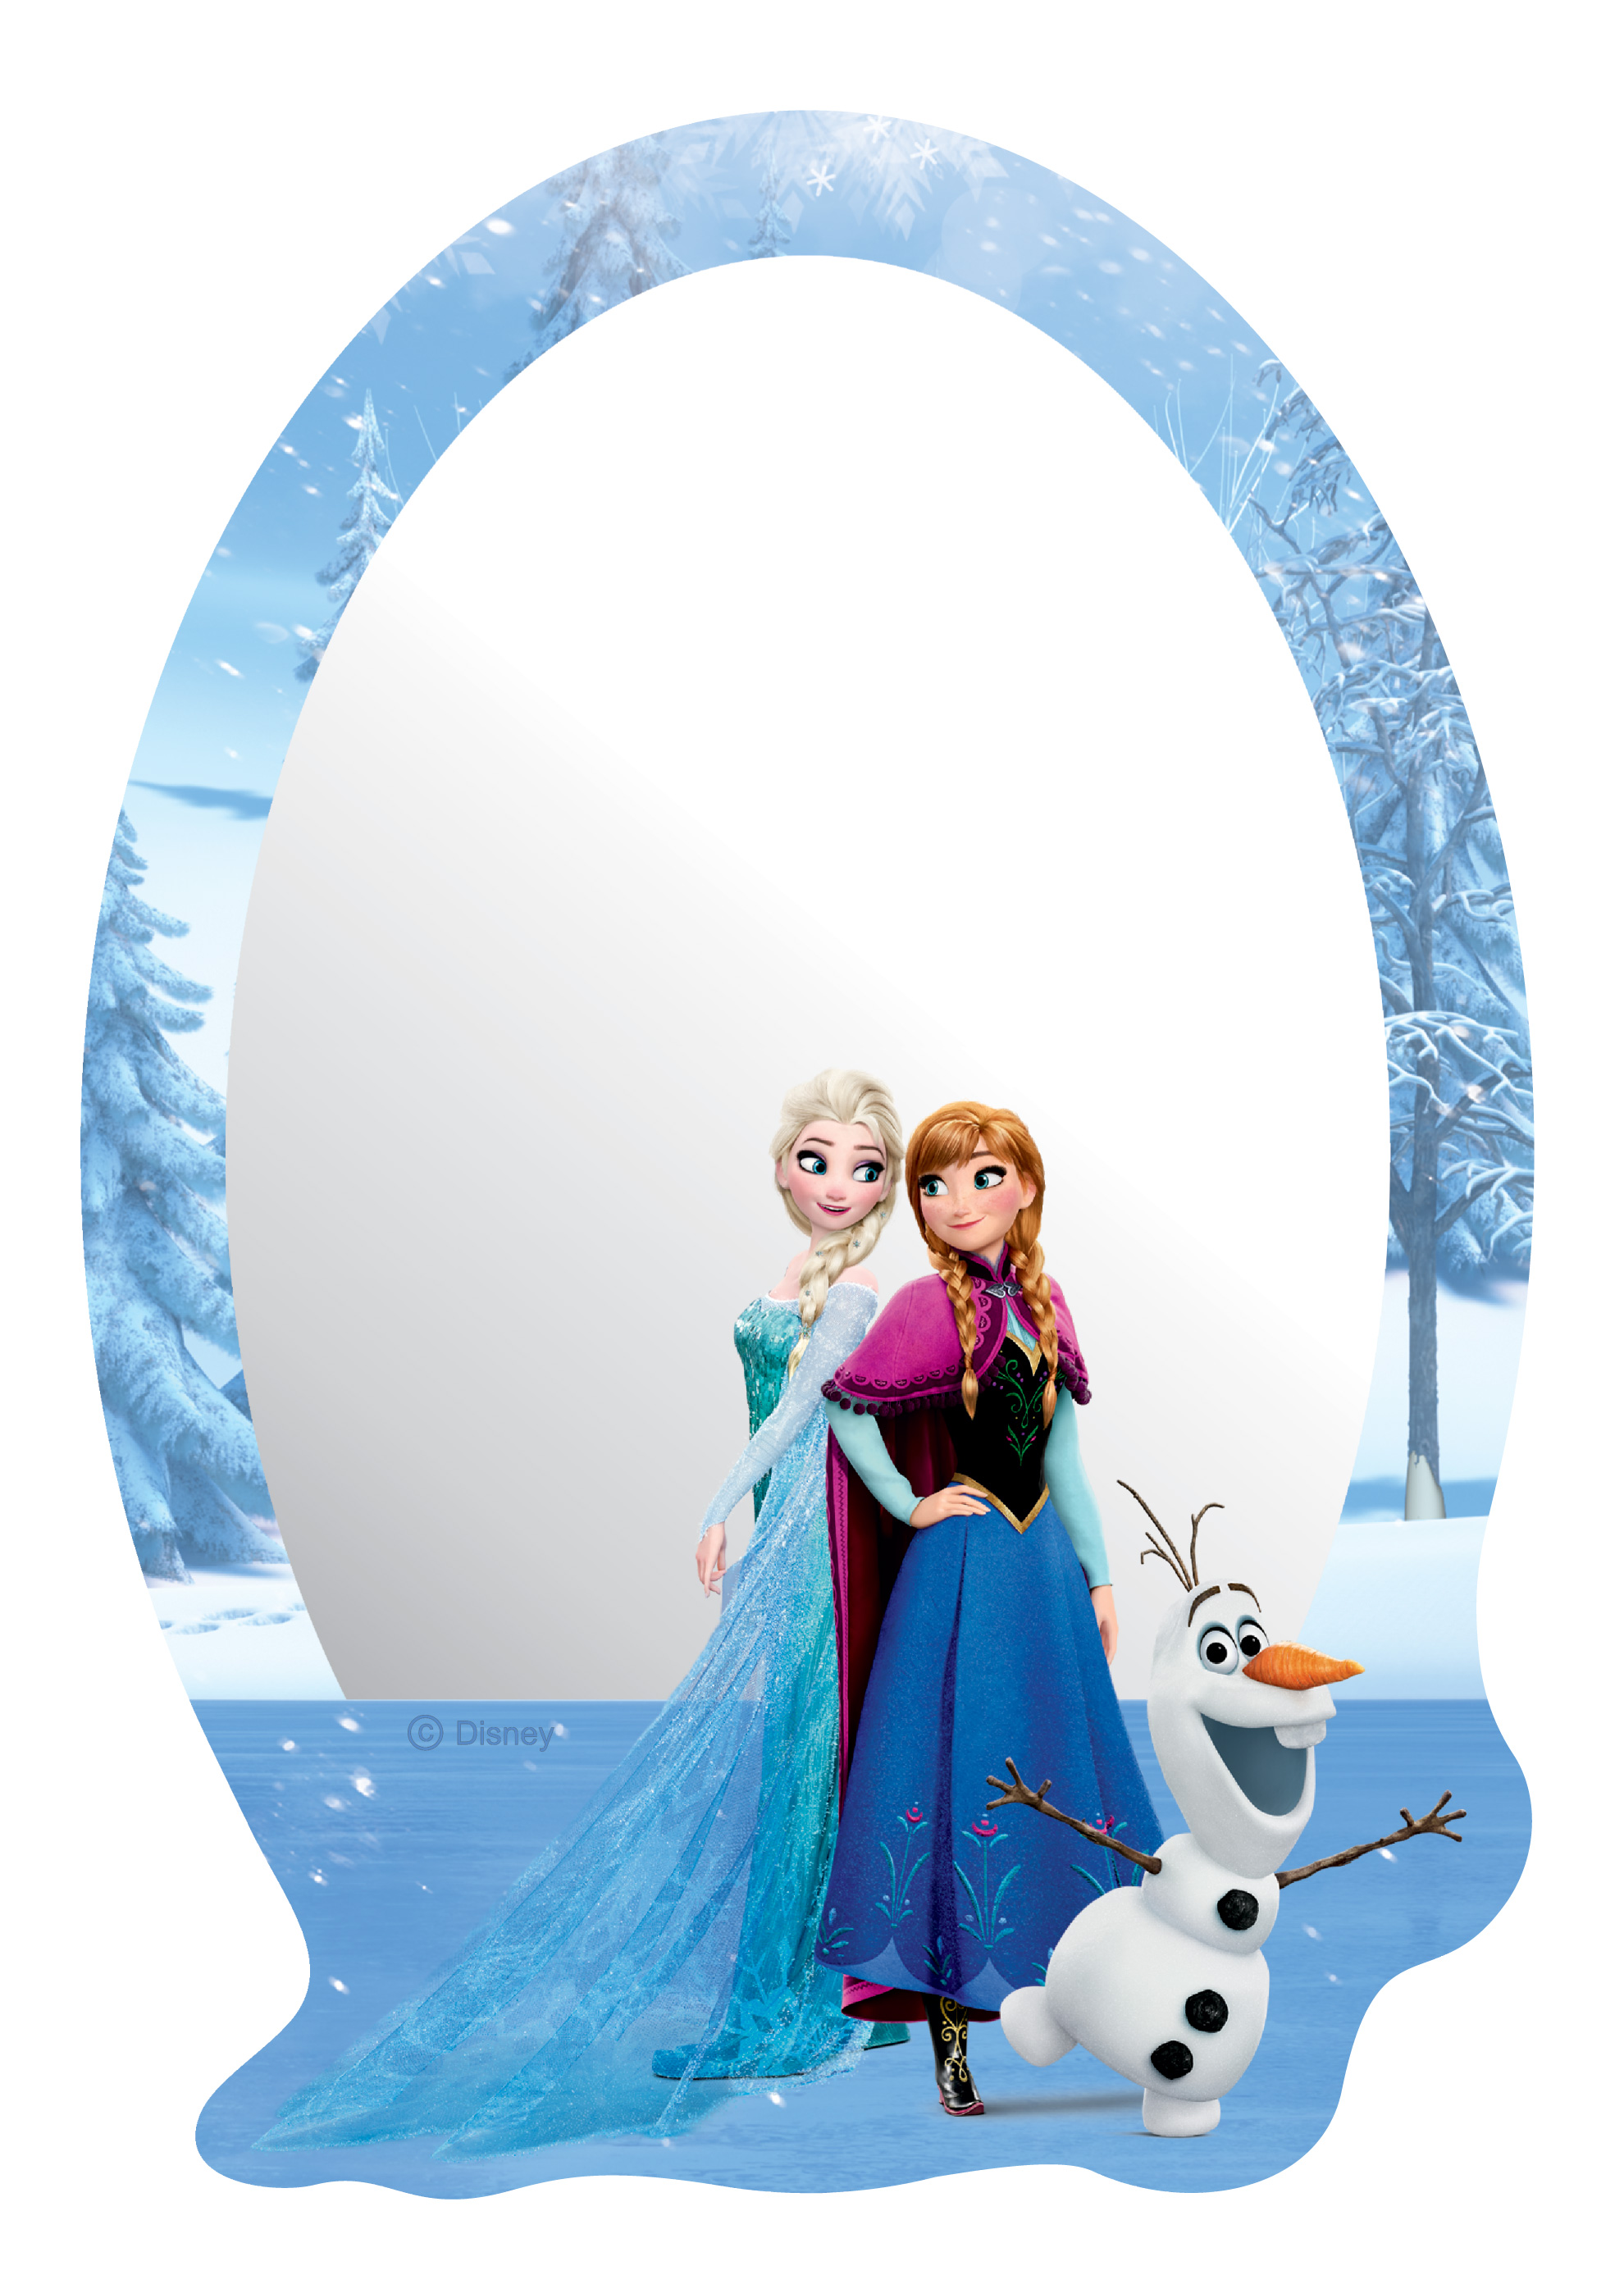 Frozen Frame Wallpapers High Quality